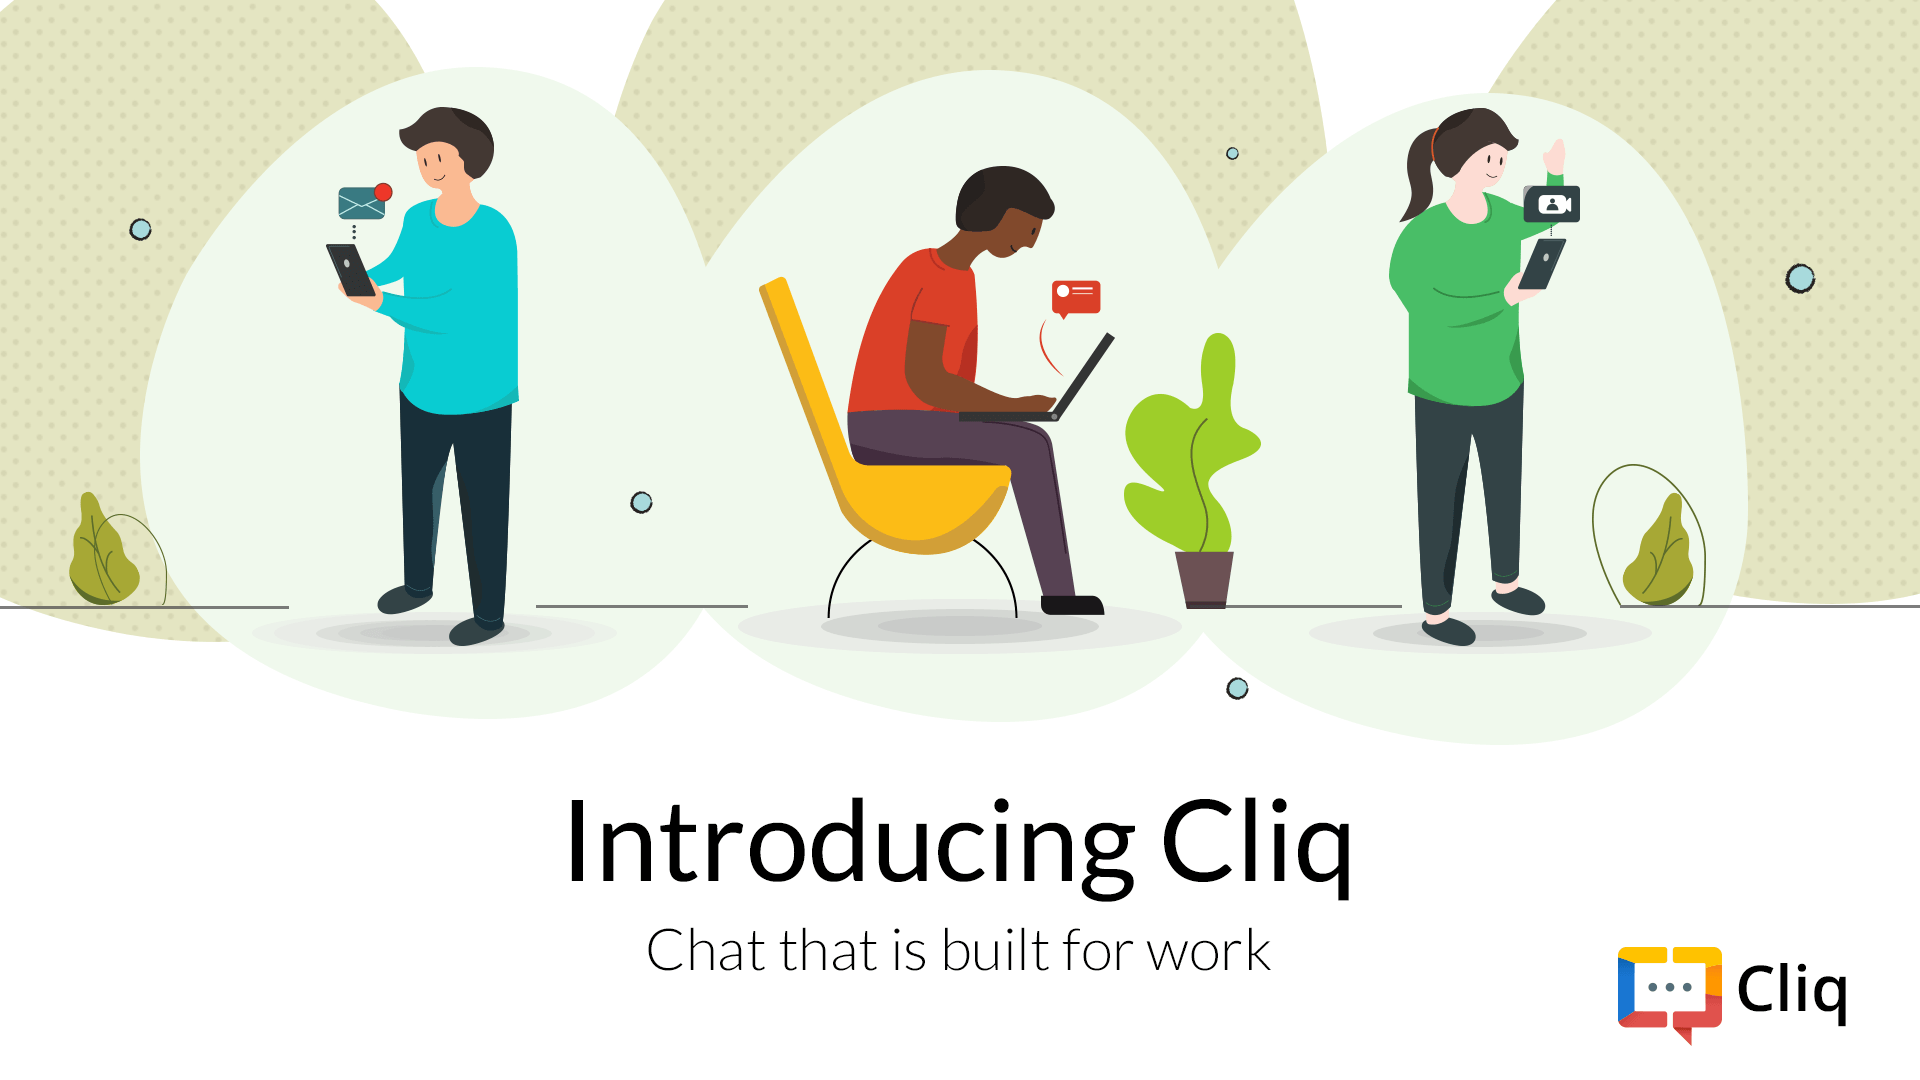 Introducing Cliq: Business chat software built for work